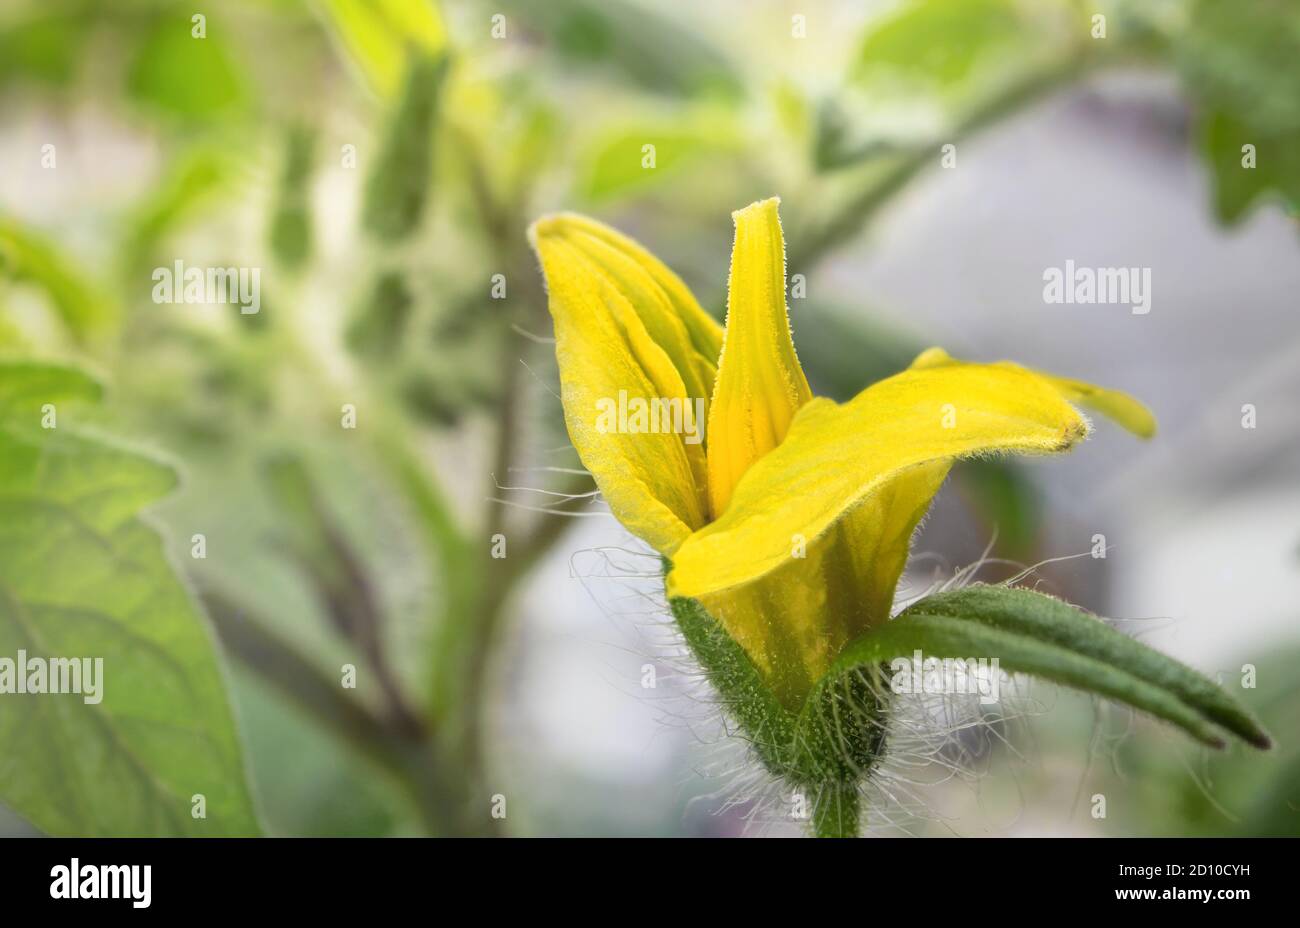 Close of tomato blossom. Single yellow open flower with soft green closed buds in background. Cherry tomato plant determinate 'Tumbling Tom Red'. Stock Photo